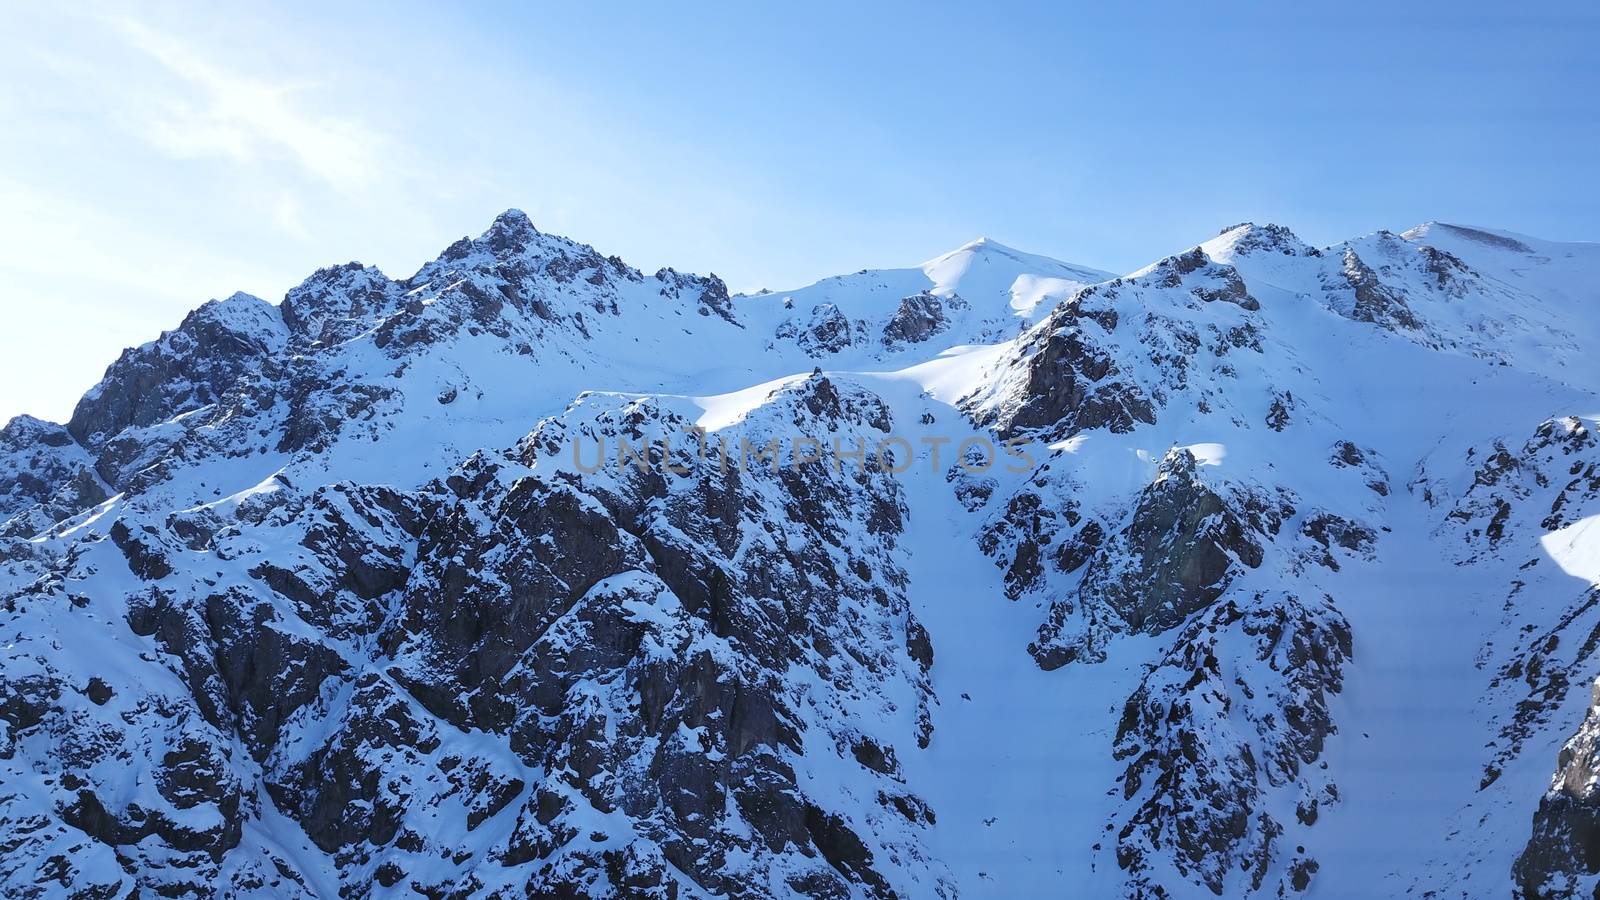 Huge rocks covered with snow. Dangerous terrain. High mountains, cliffs, and large rocks. Shadow from the sun's rays. Top and side view from the drone. An epic place. The Mountains Of Almaty.